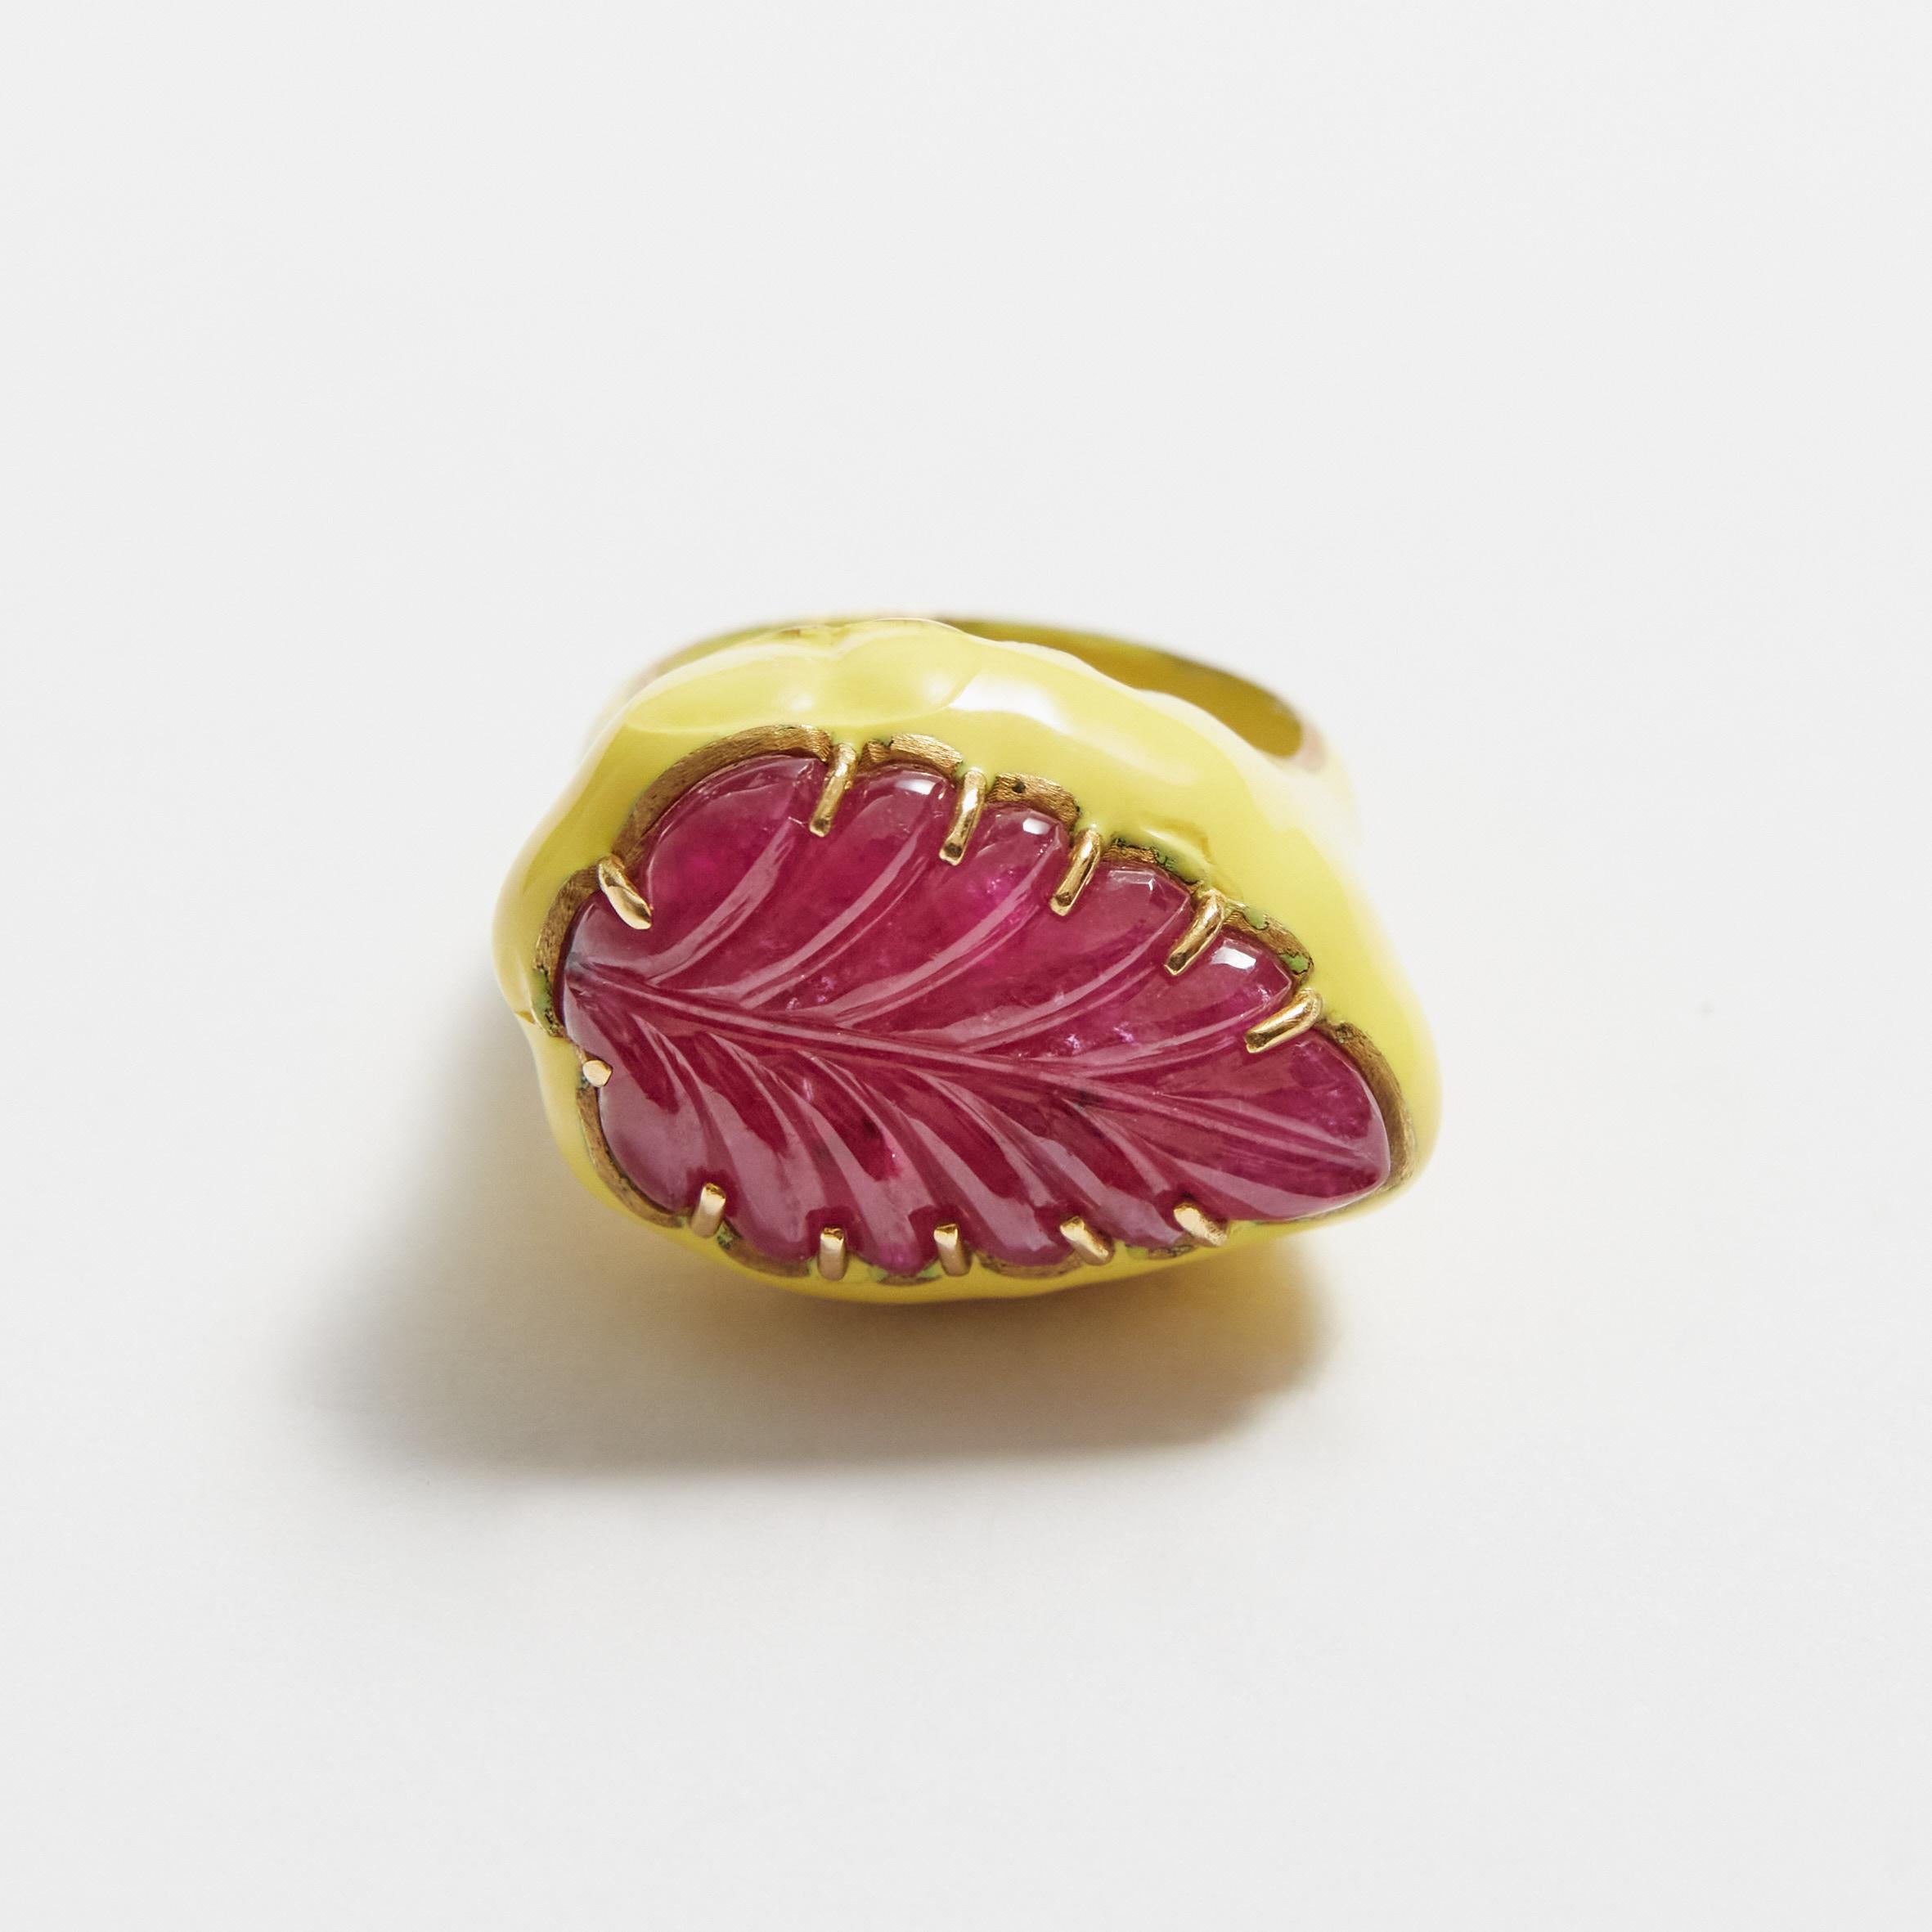 Unique pieces made by hand with the. antique enamel technic, magnificent carved ruby leaf shape. 18 k gold gr 18 6 ctts ruby.
All Giulia Colussi jewelry is new and has never been previously owned or worn. Each item will arrive at your door